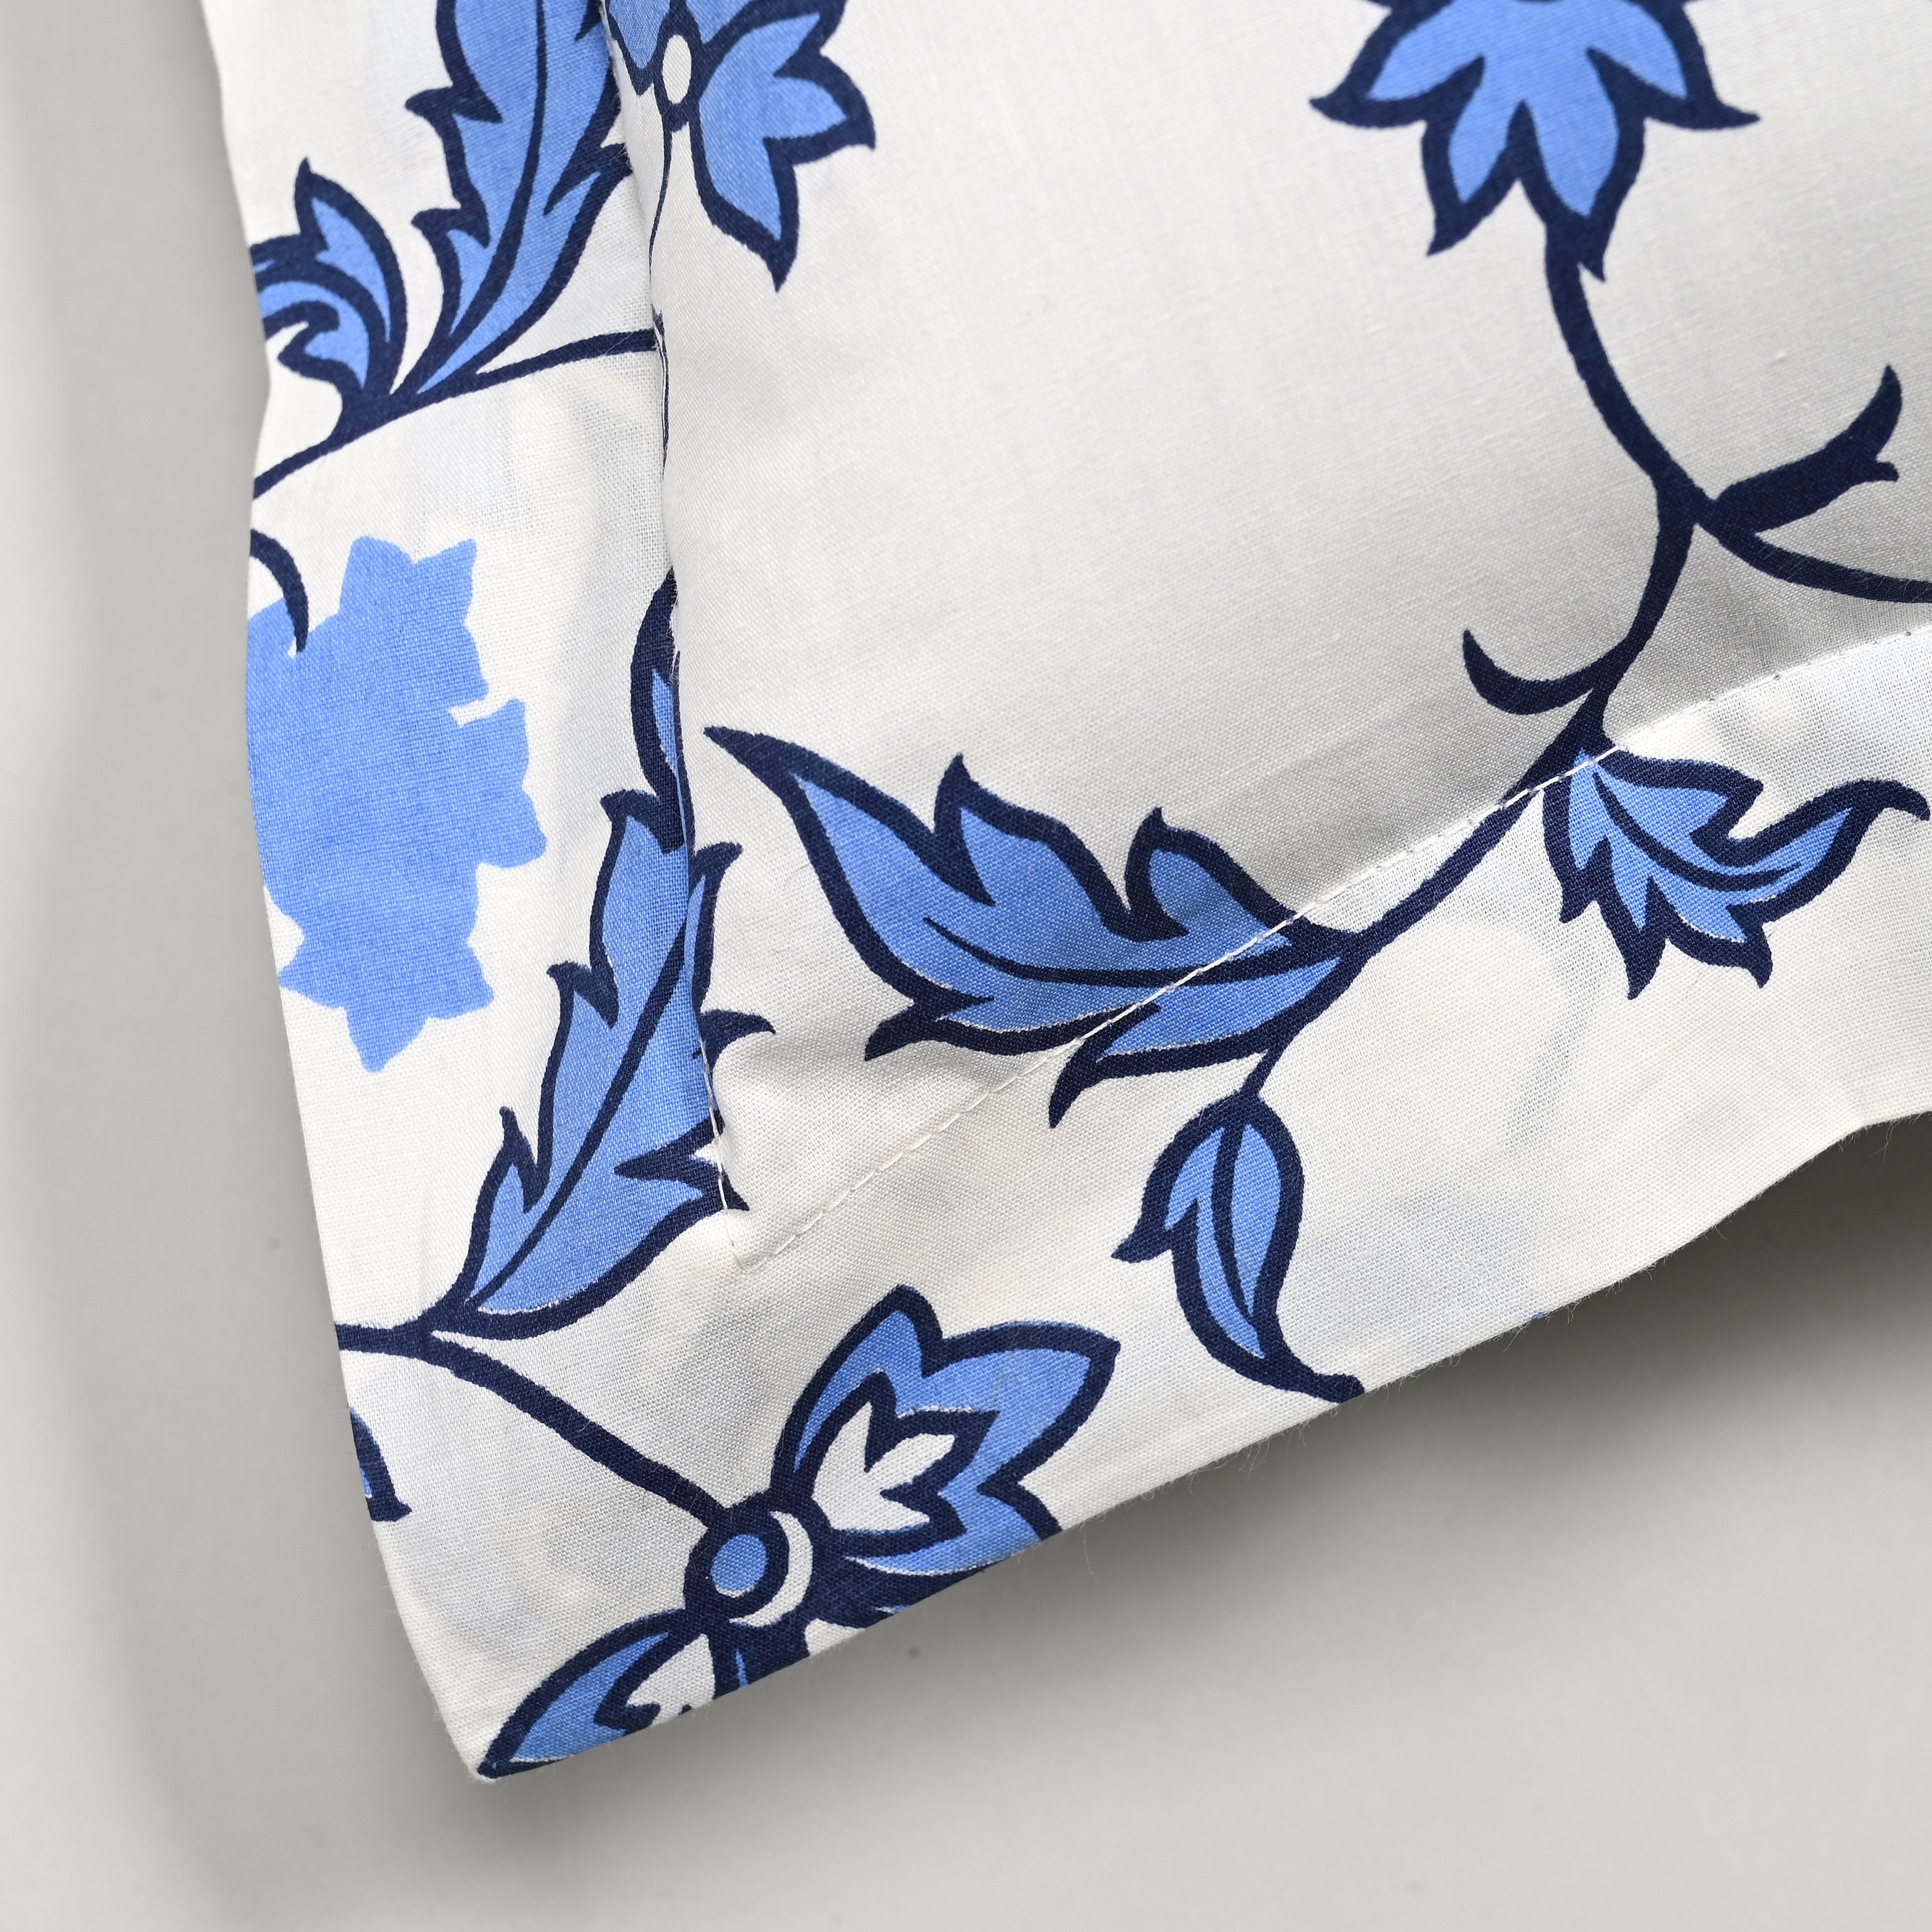 Leaves Pillow Case Set of 2 Covers